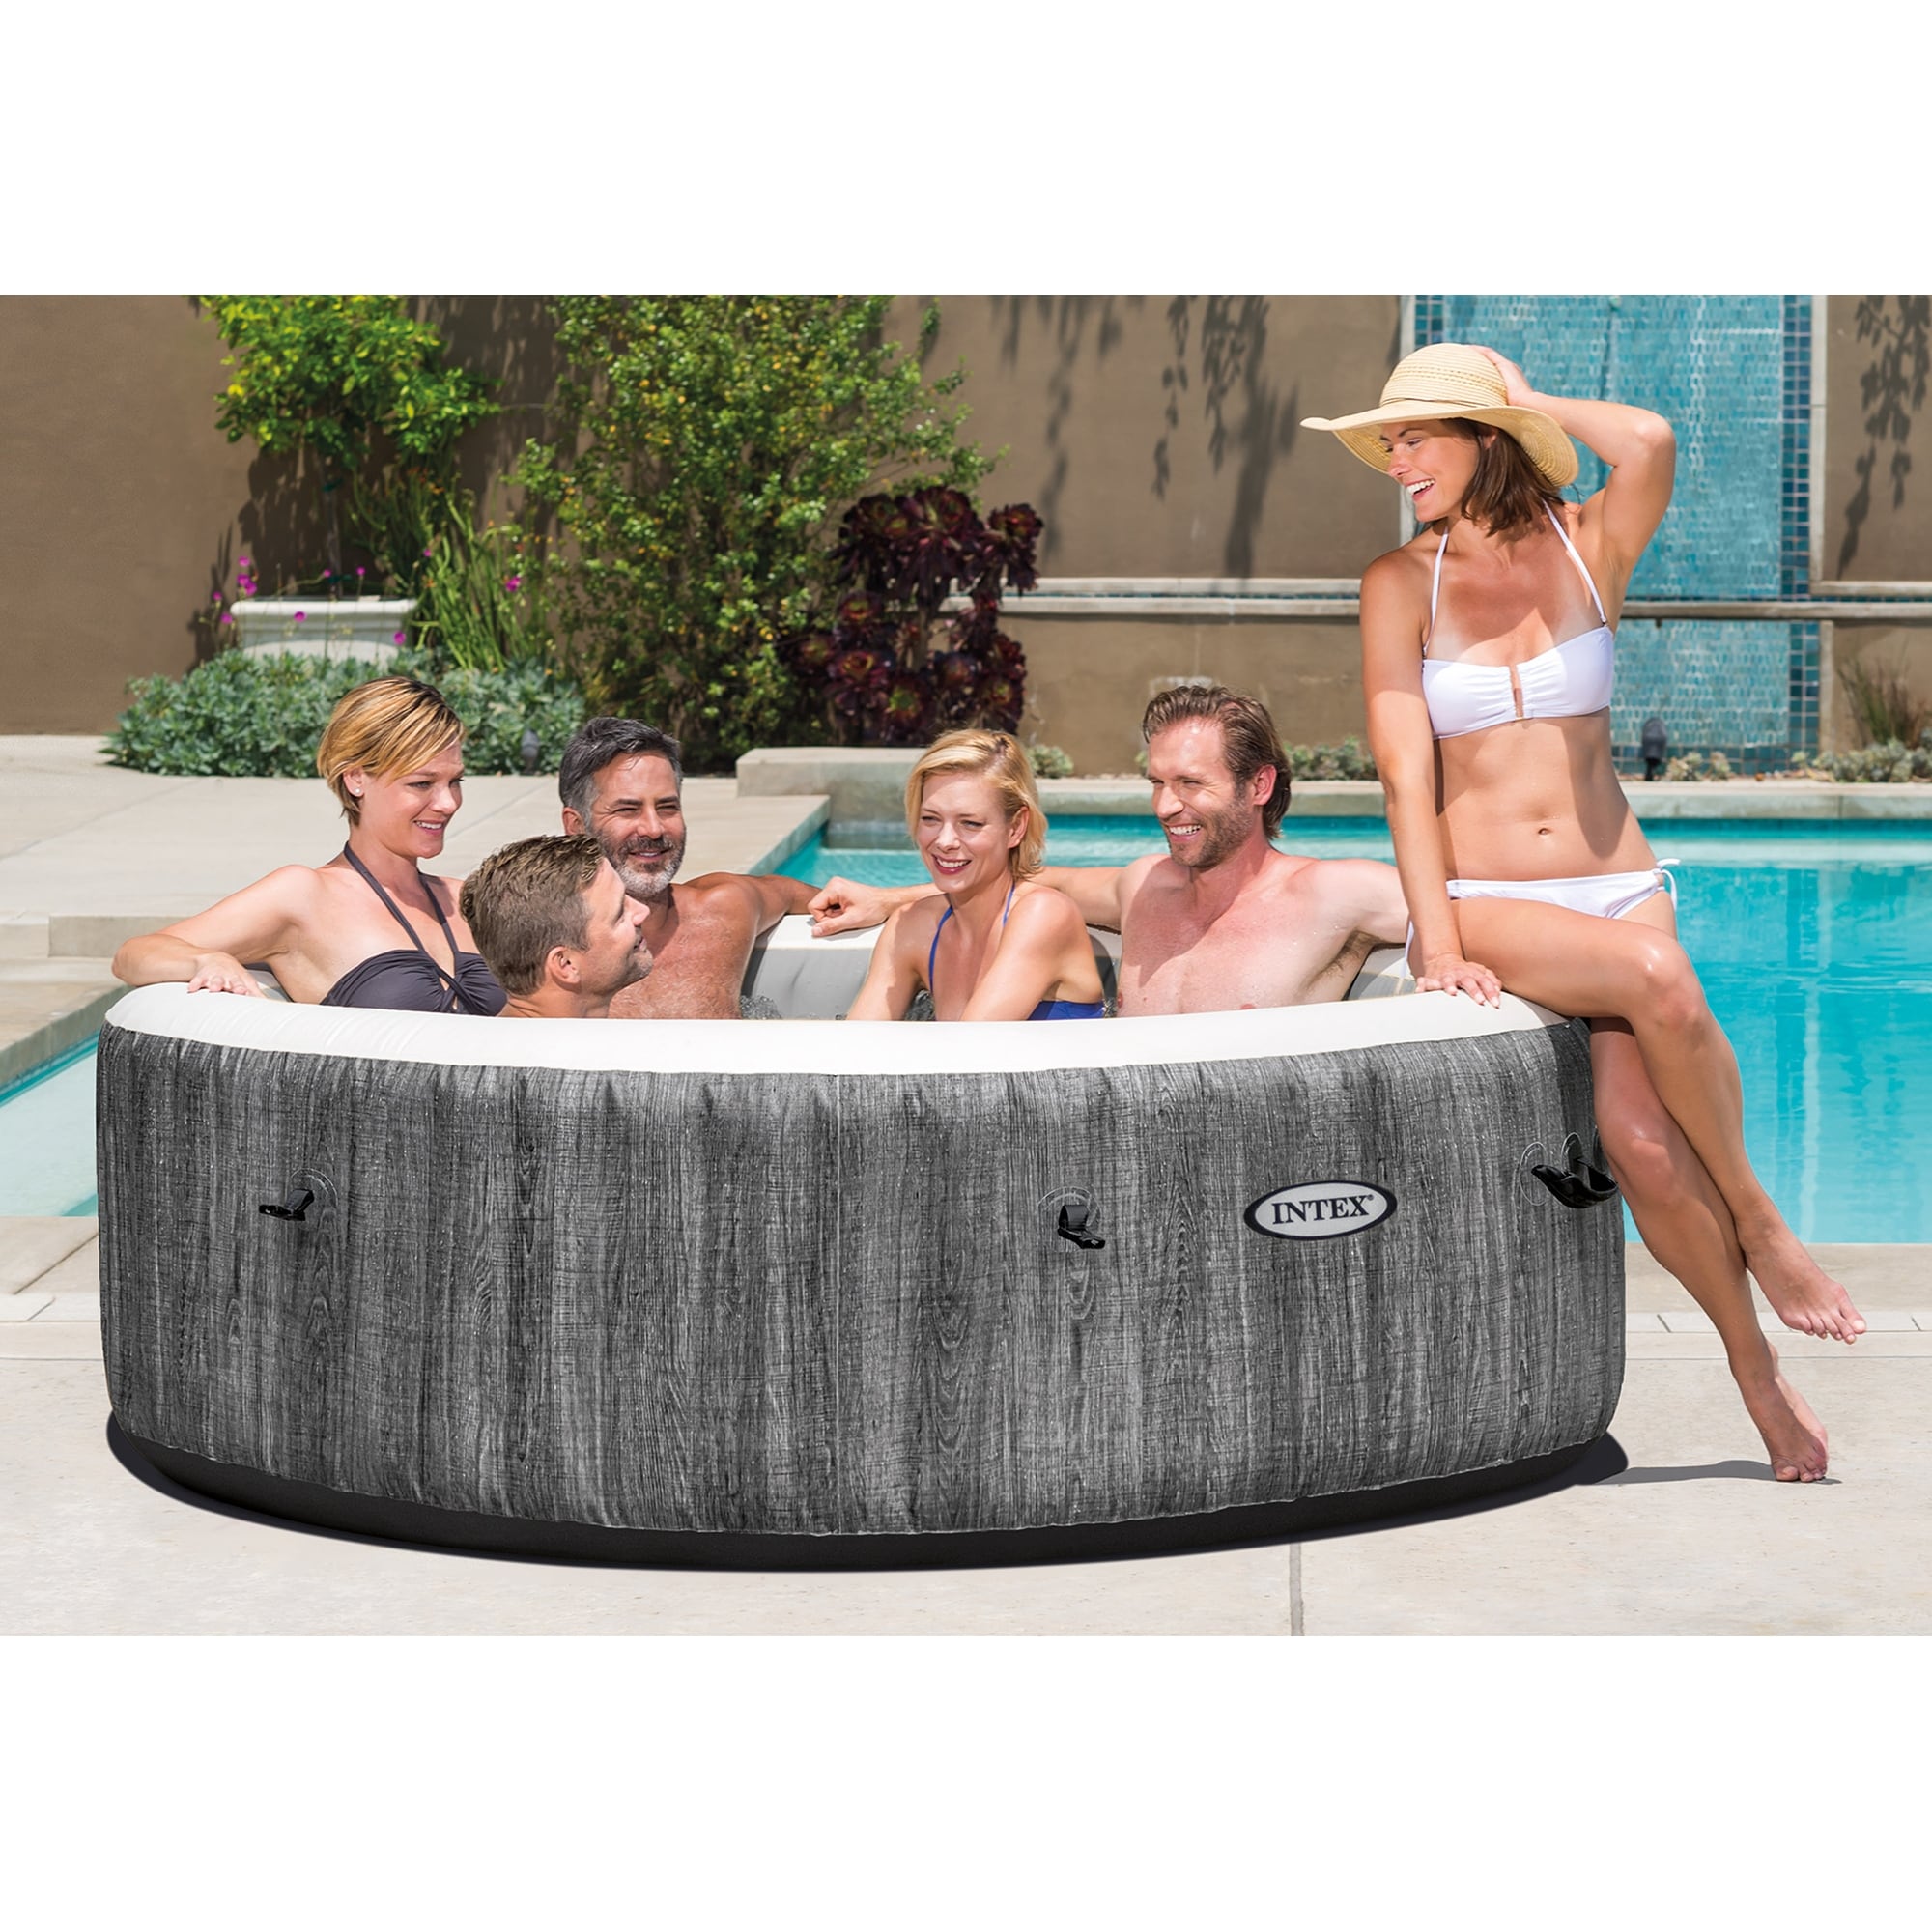 Intex PureSpa Greywood Inflatable Spa  Attachable Drink  Snack Tray (4  Pack) 126 Bed Bath  Beyond 36137661